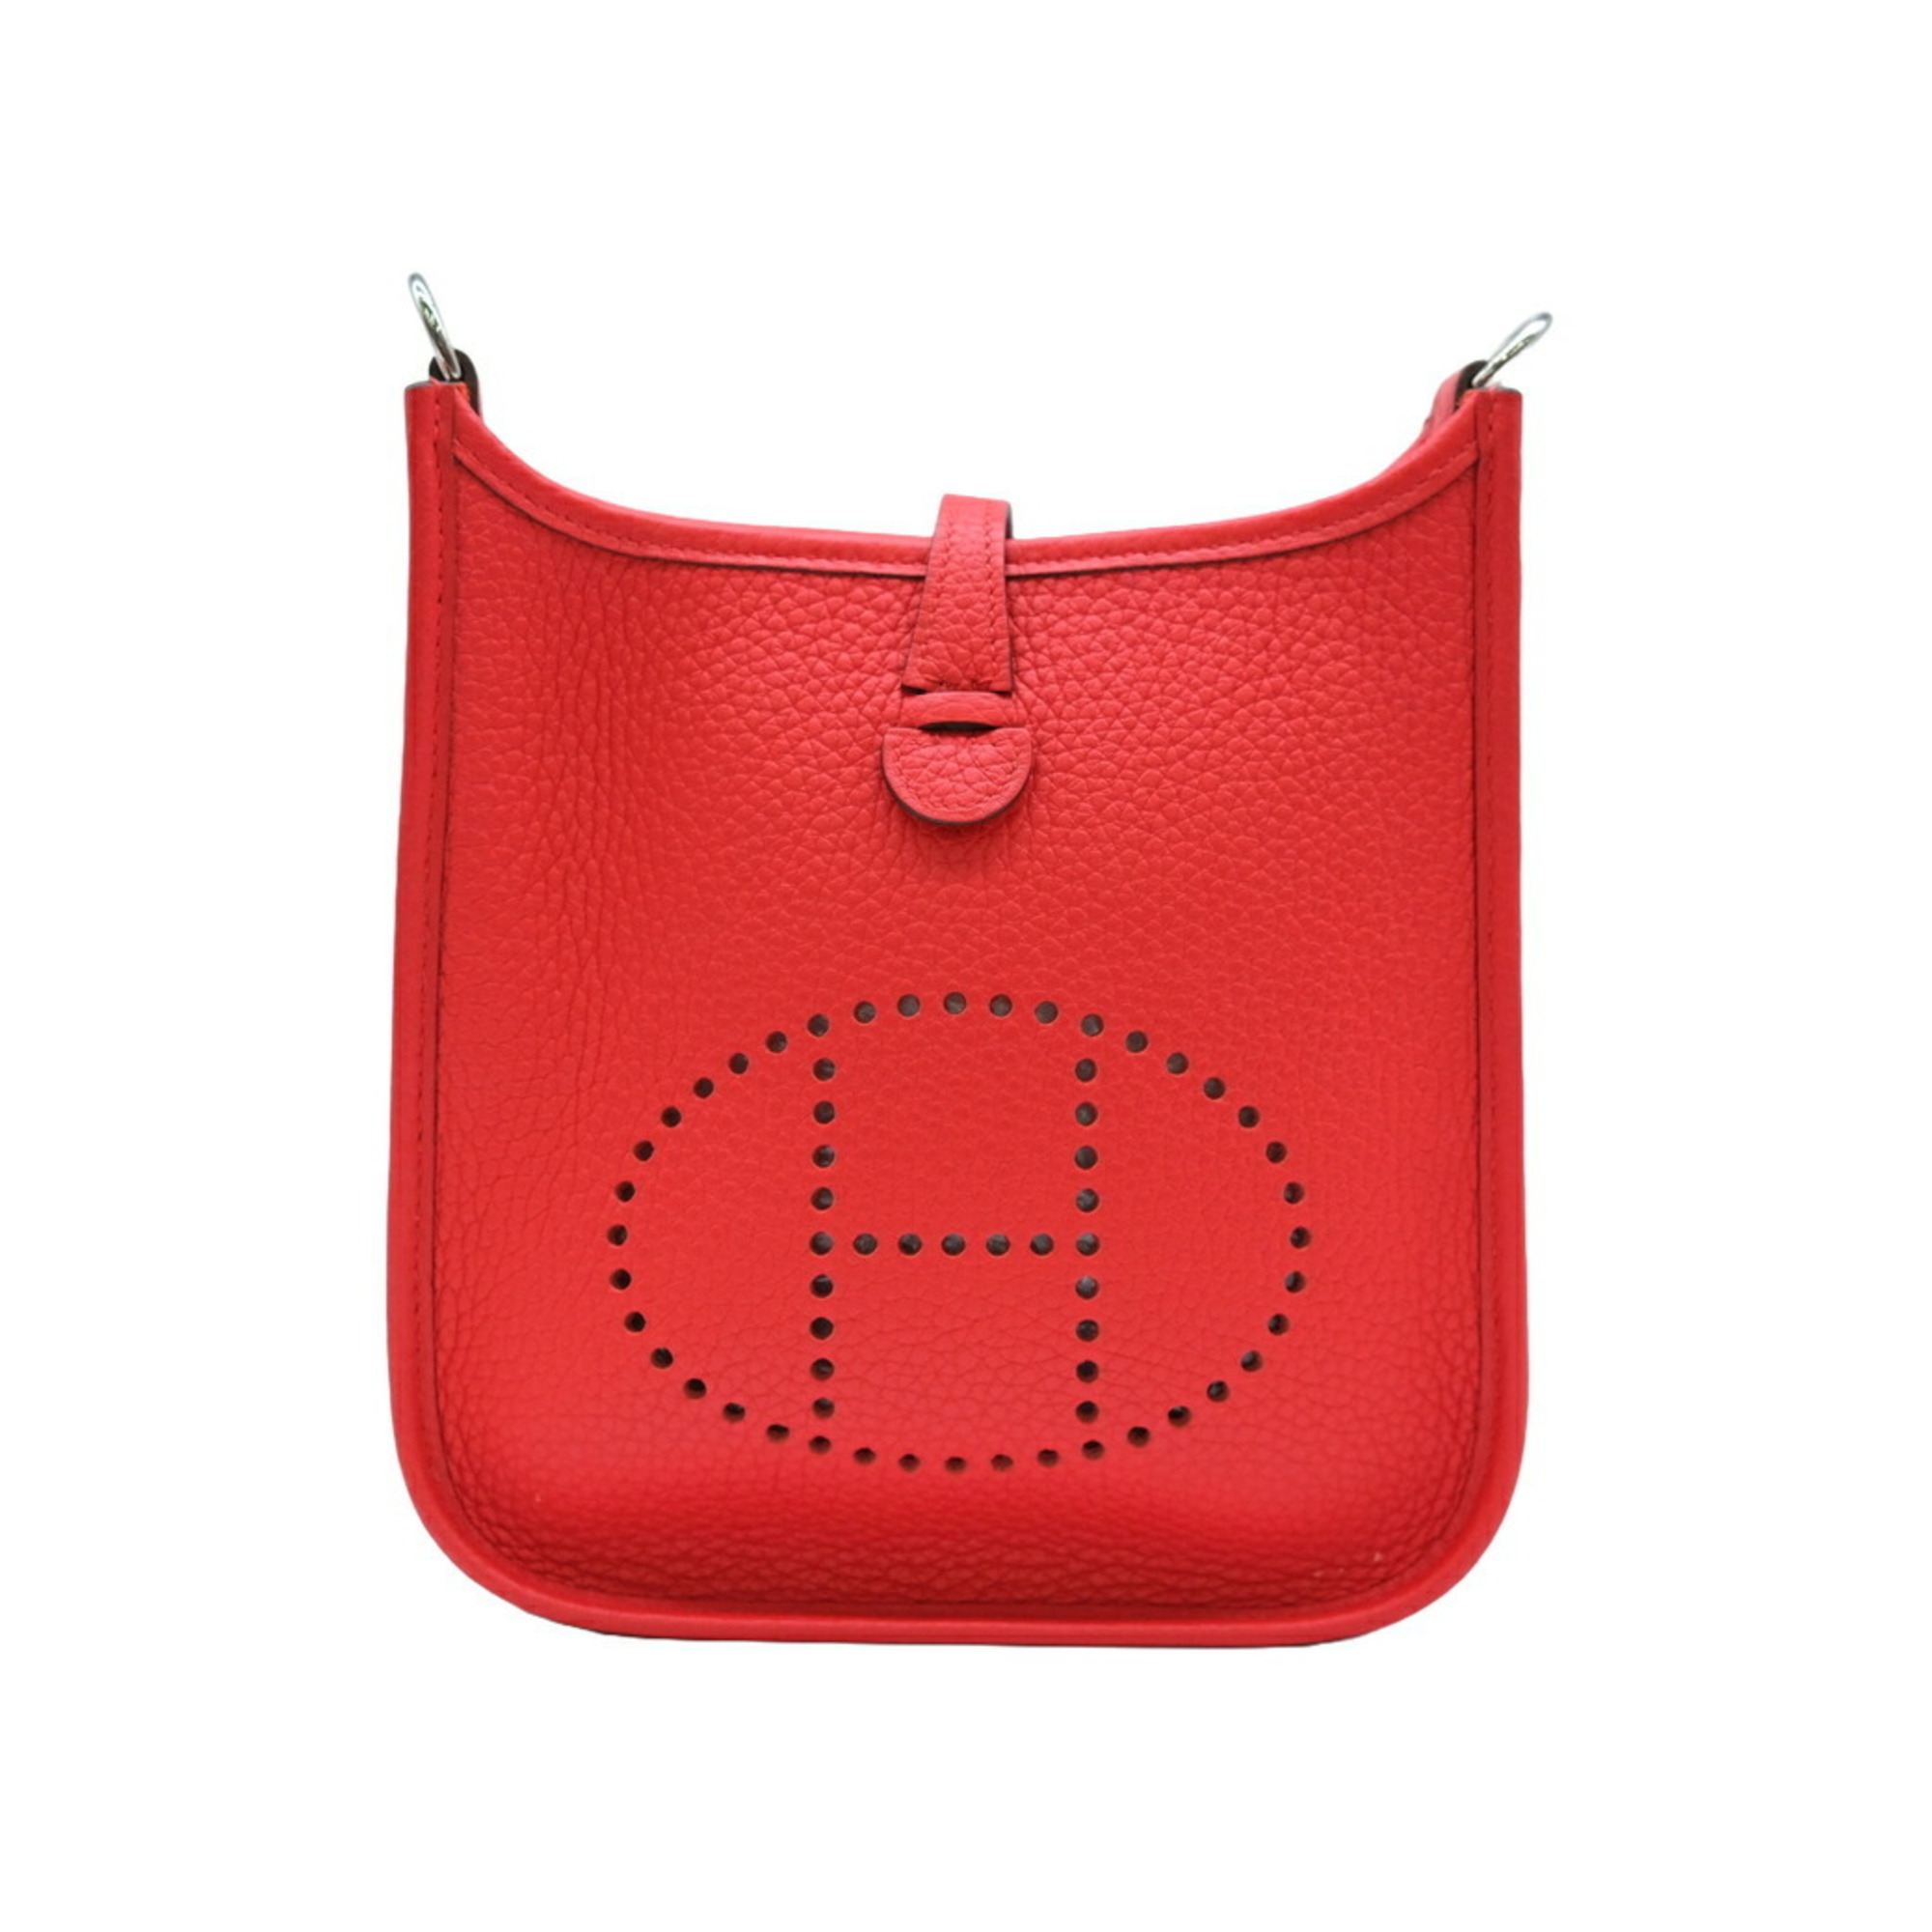 HERMES Evelyn TPM shoulder bag in leather, Taurillon Clemence, Rouge Coeur, red